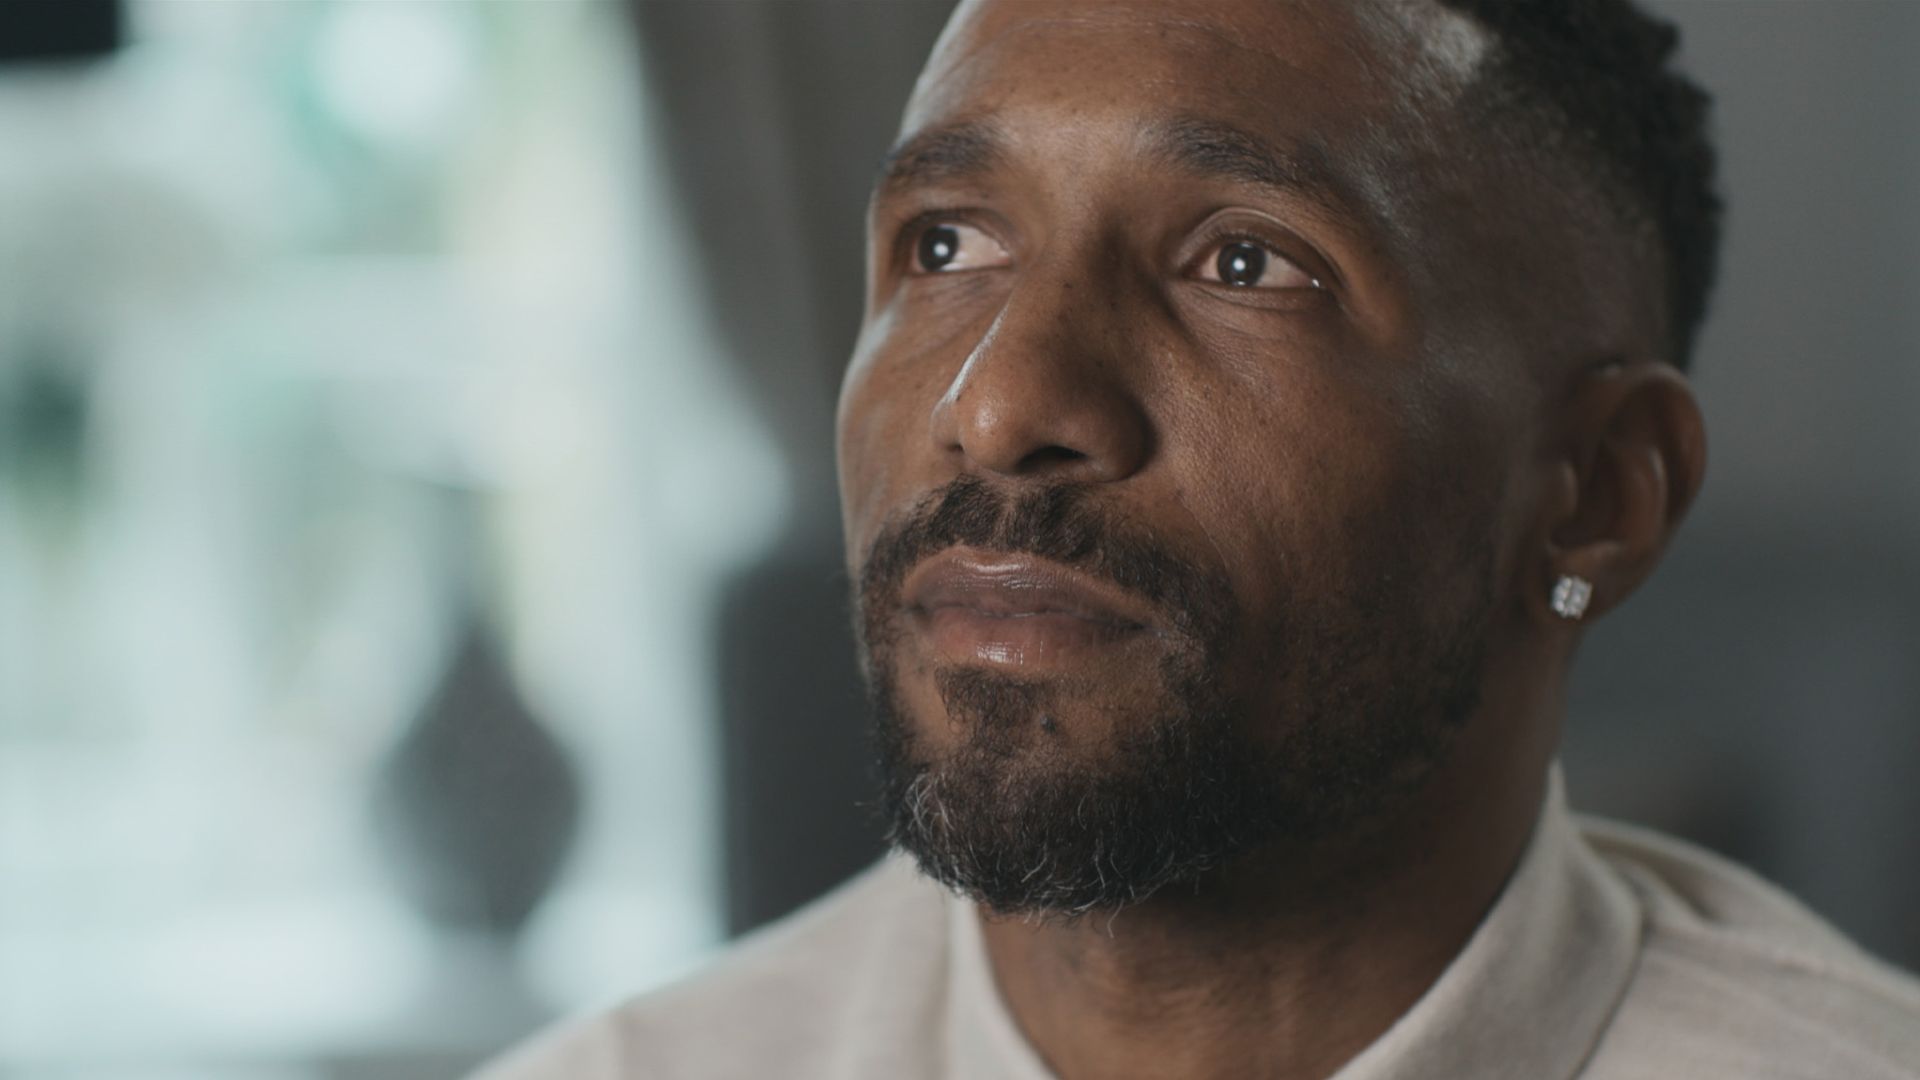 Defoe opens up on loss, inspirations and the move to management